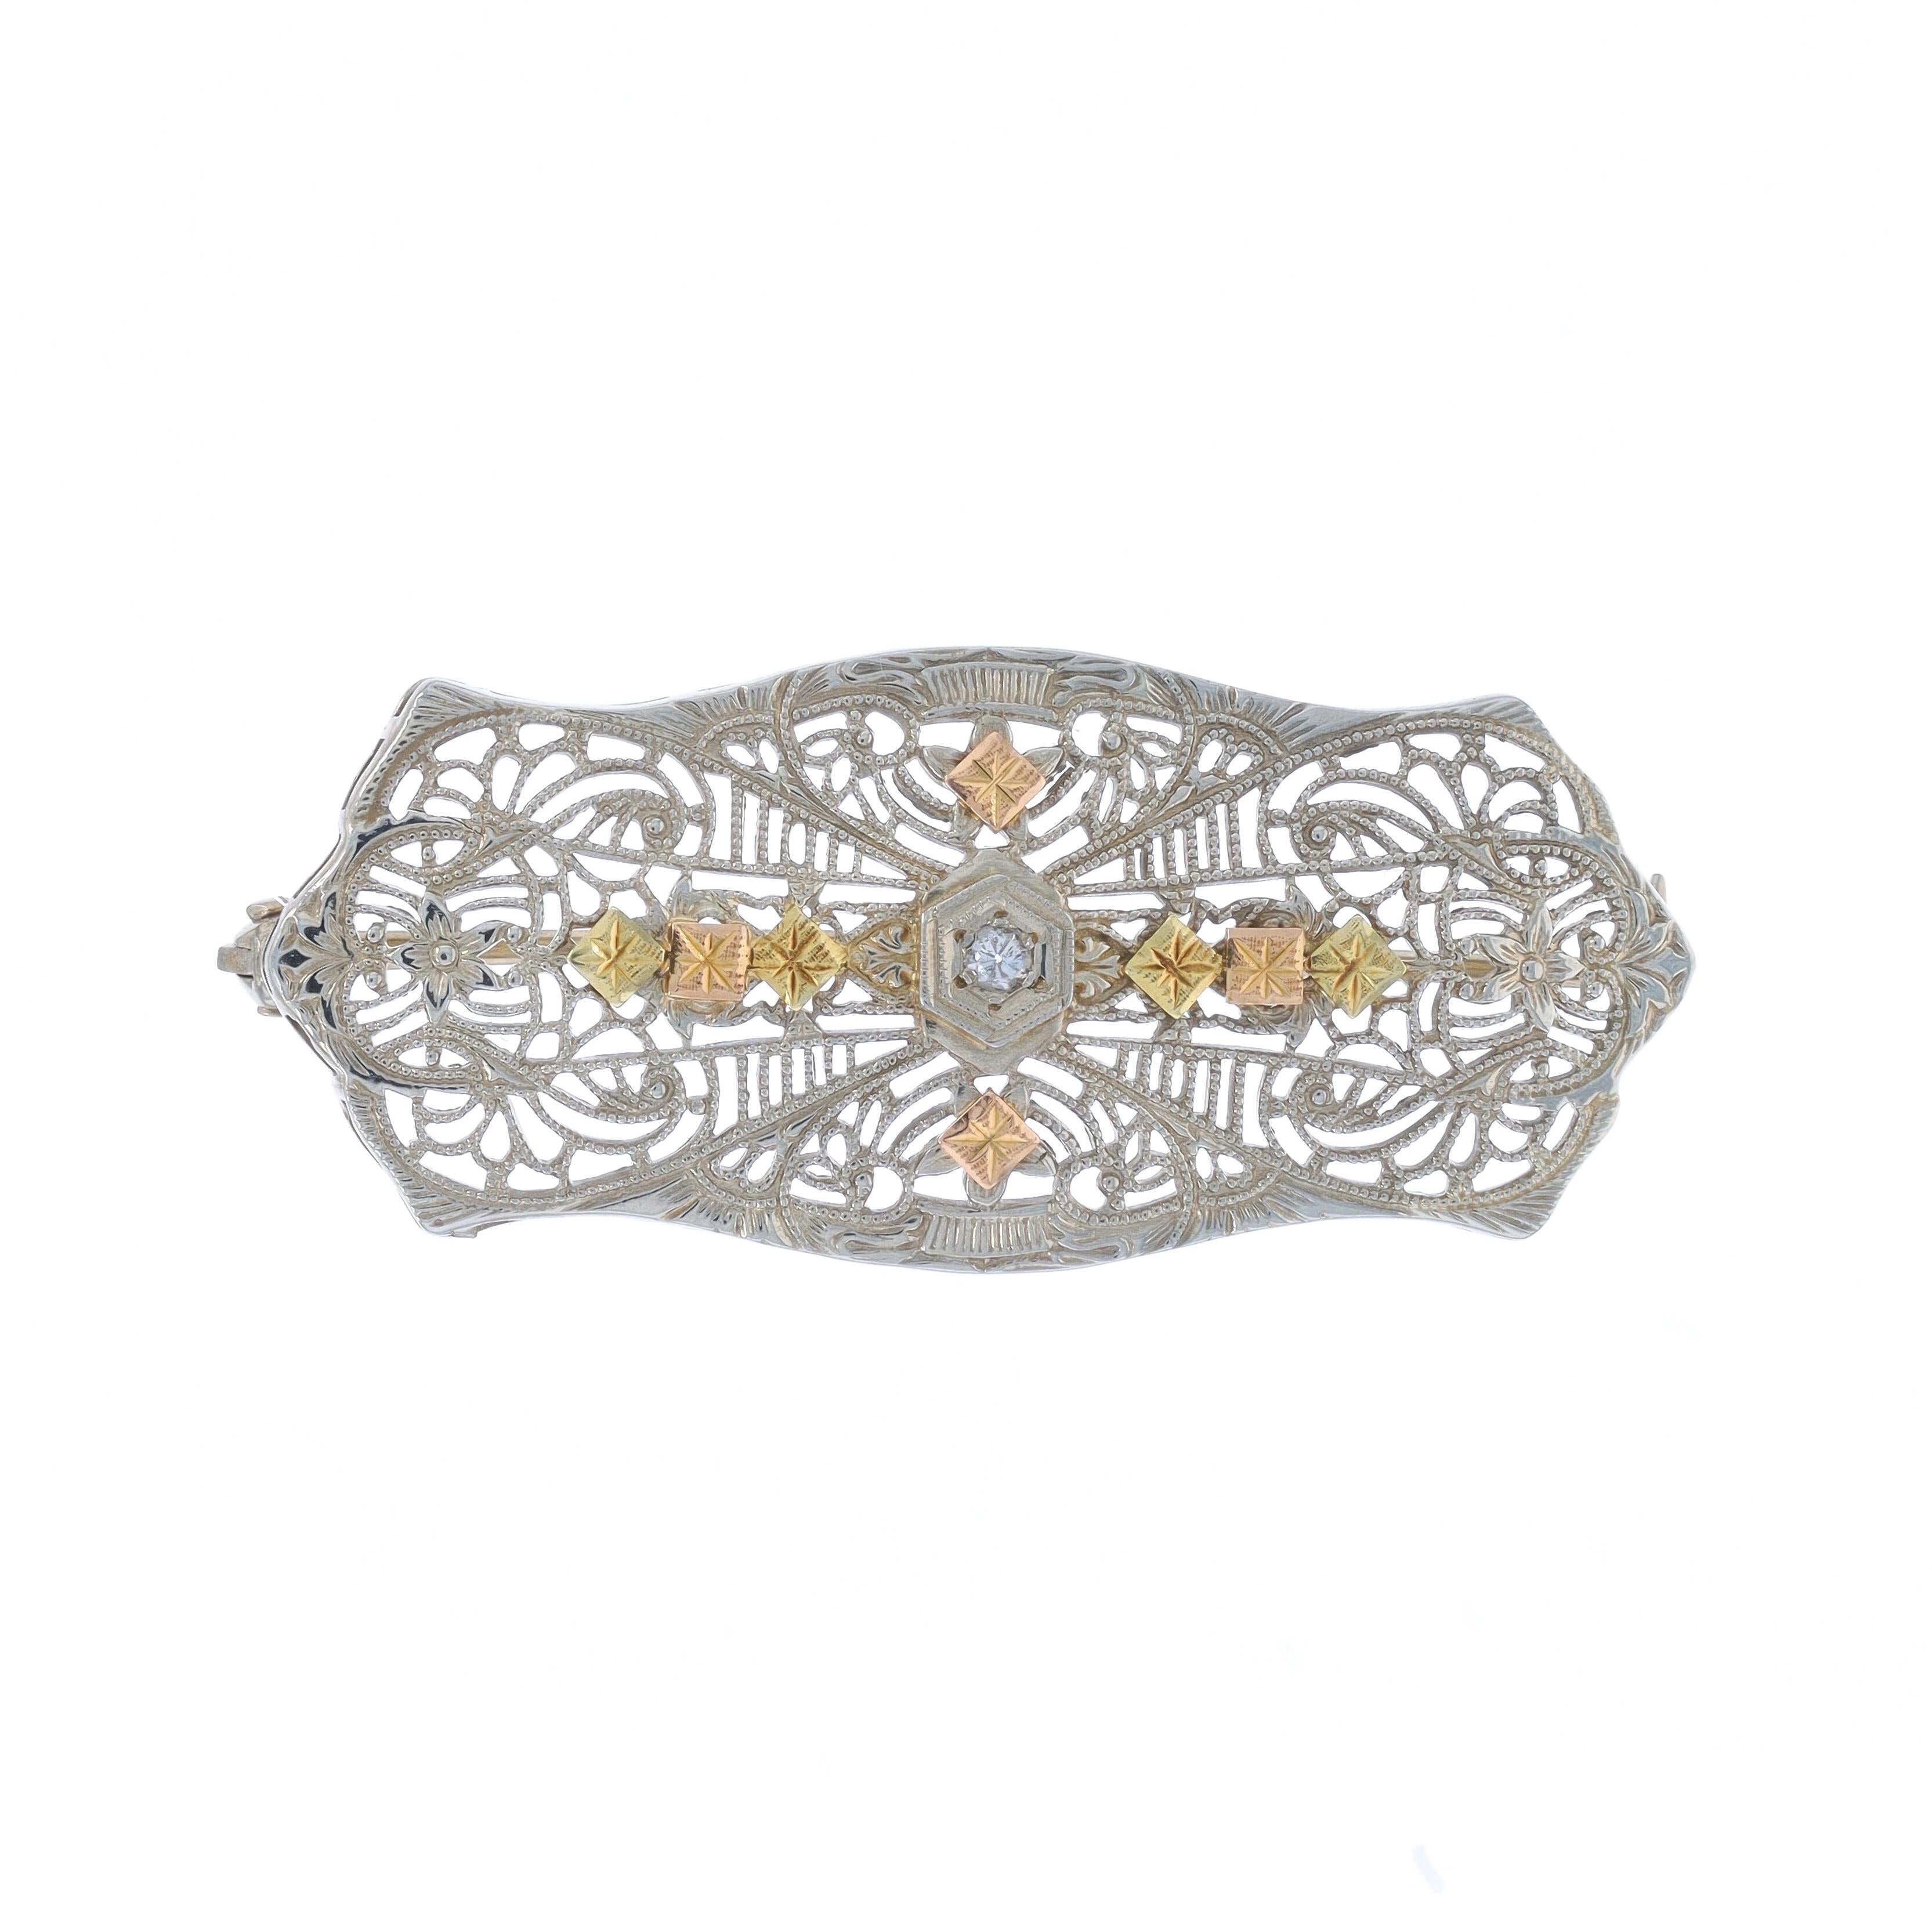 Era: Art Deco
Date: 1920s - 1930s

Metal Content: 10k White Gold, 10k Yellow Gold, & 10k Rose Gold

Stone Information

Natural Diamond
Carat(s): .04ct
Cut: Single
Color: G
Clarity: SI2

Style: Brooch
Fastening Type: Hinged Pin and Locking